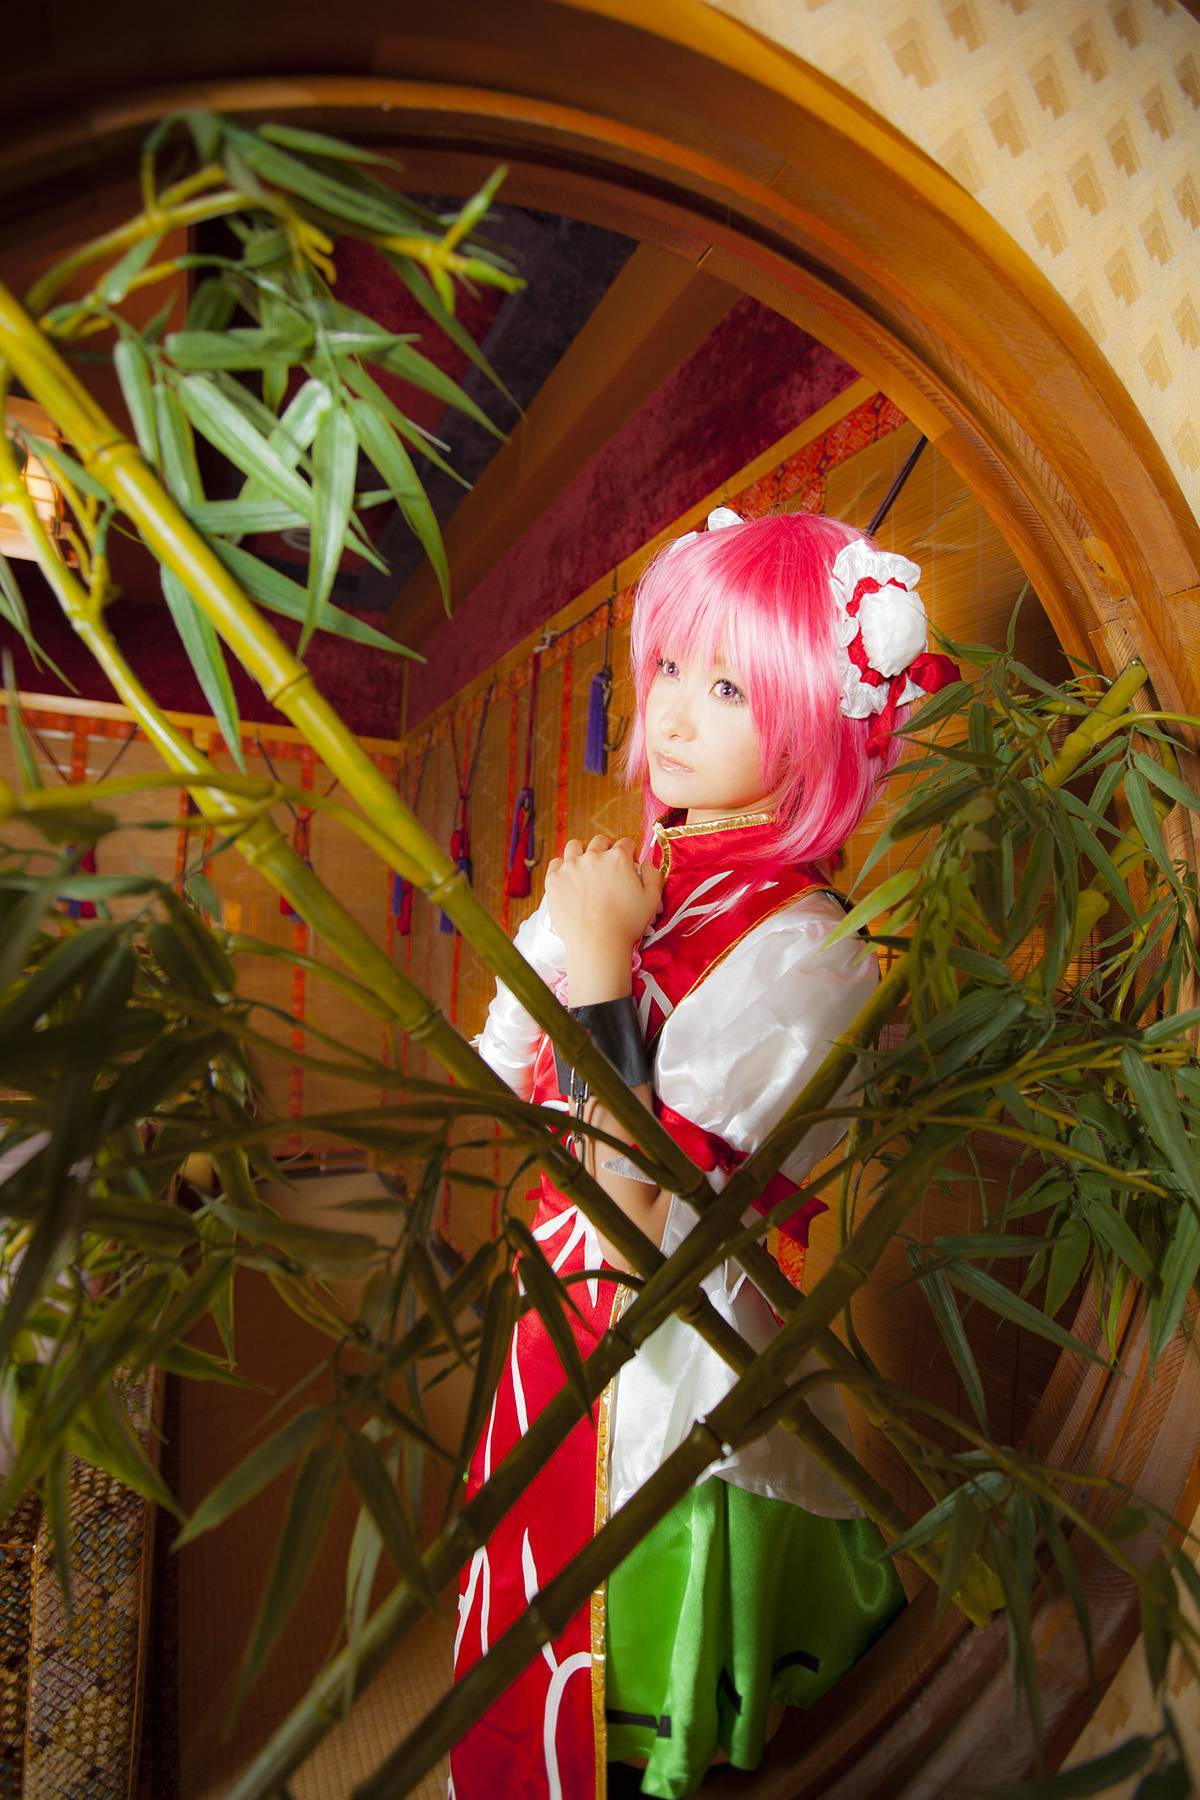 [Cosplay] New Touhou Project Cosplay set - Awesome Kasen Ibara